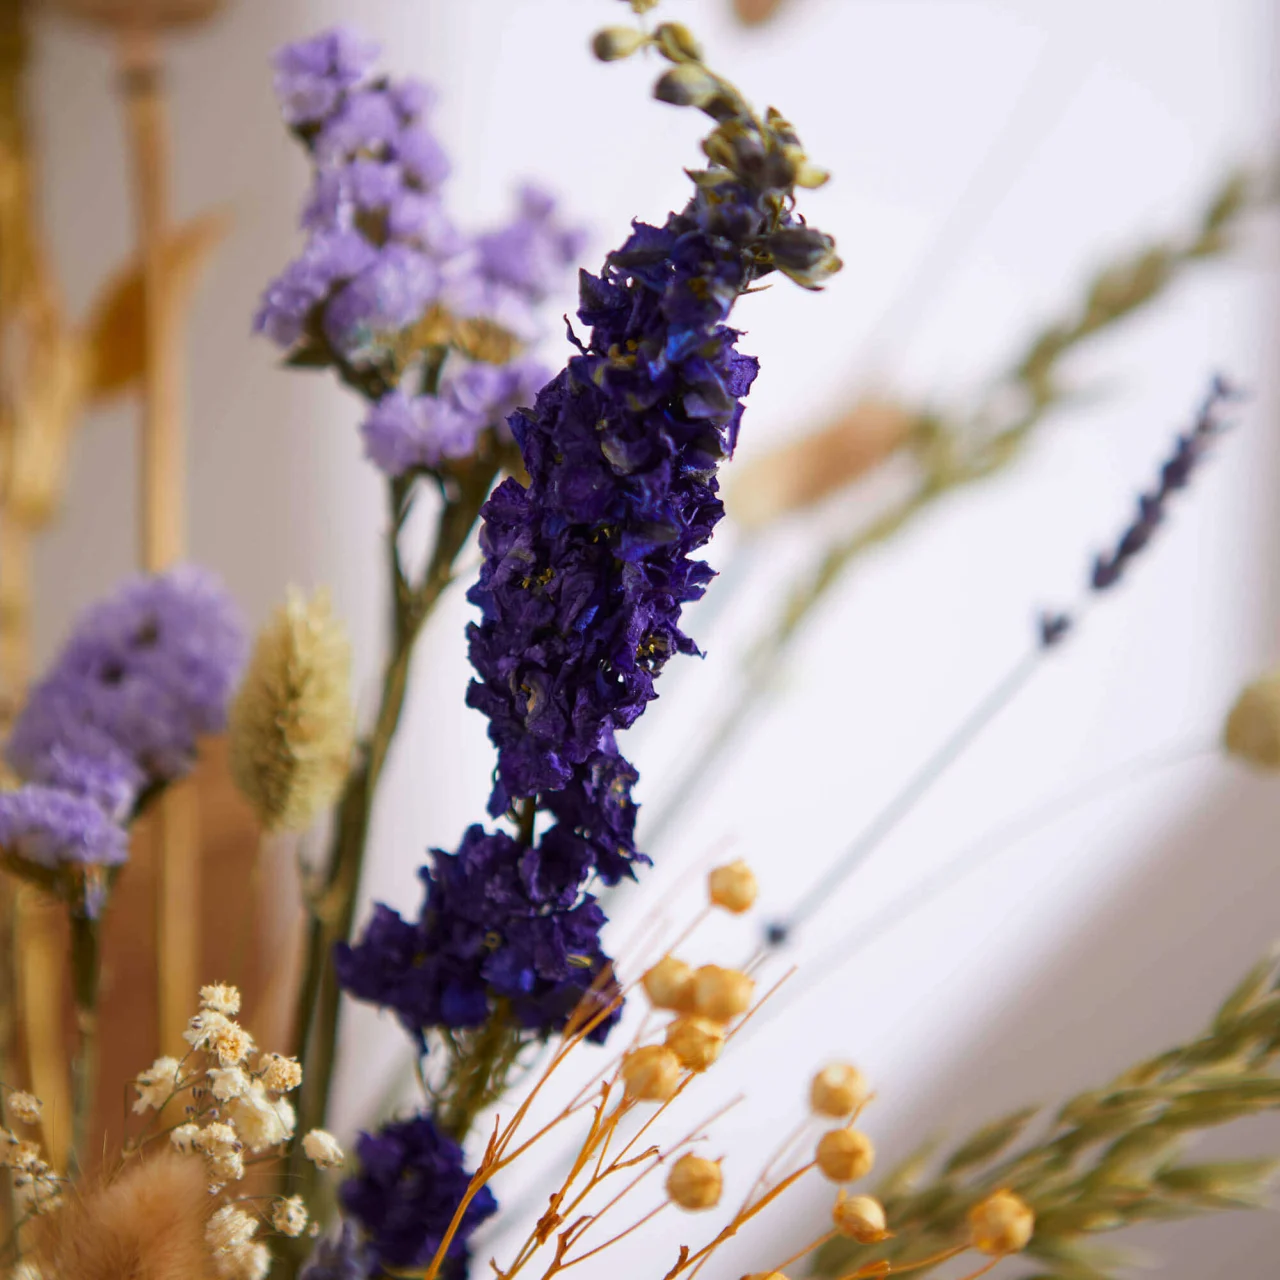 Dry Lavender Flowers Image & Photo (Free Trial)